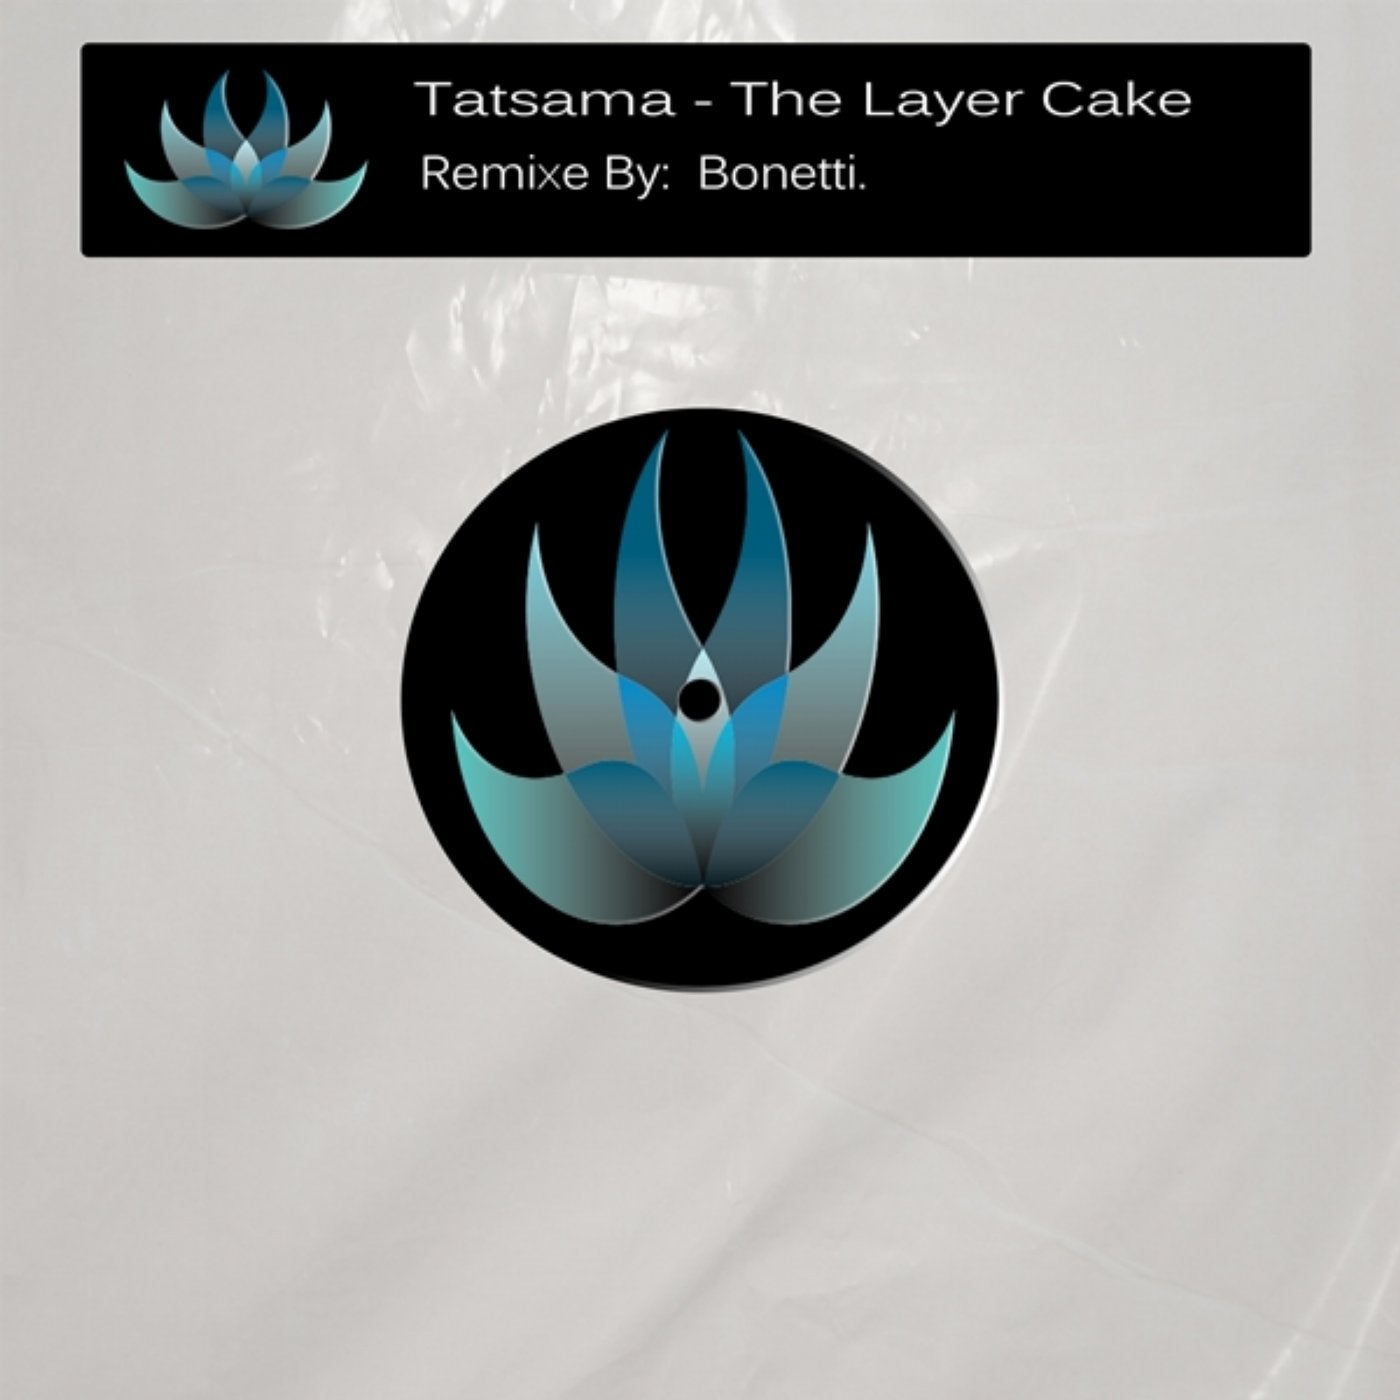 The Layer Cake